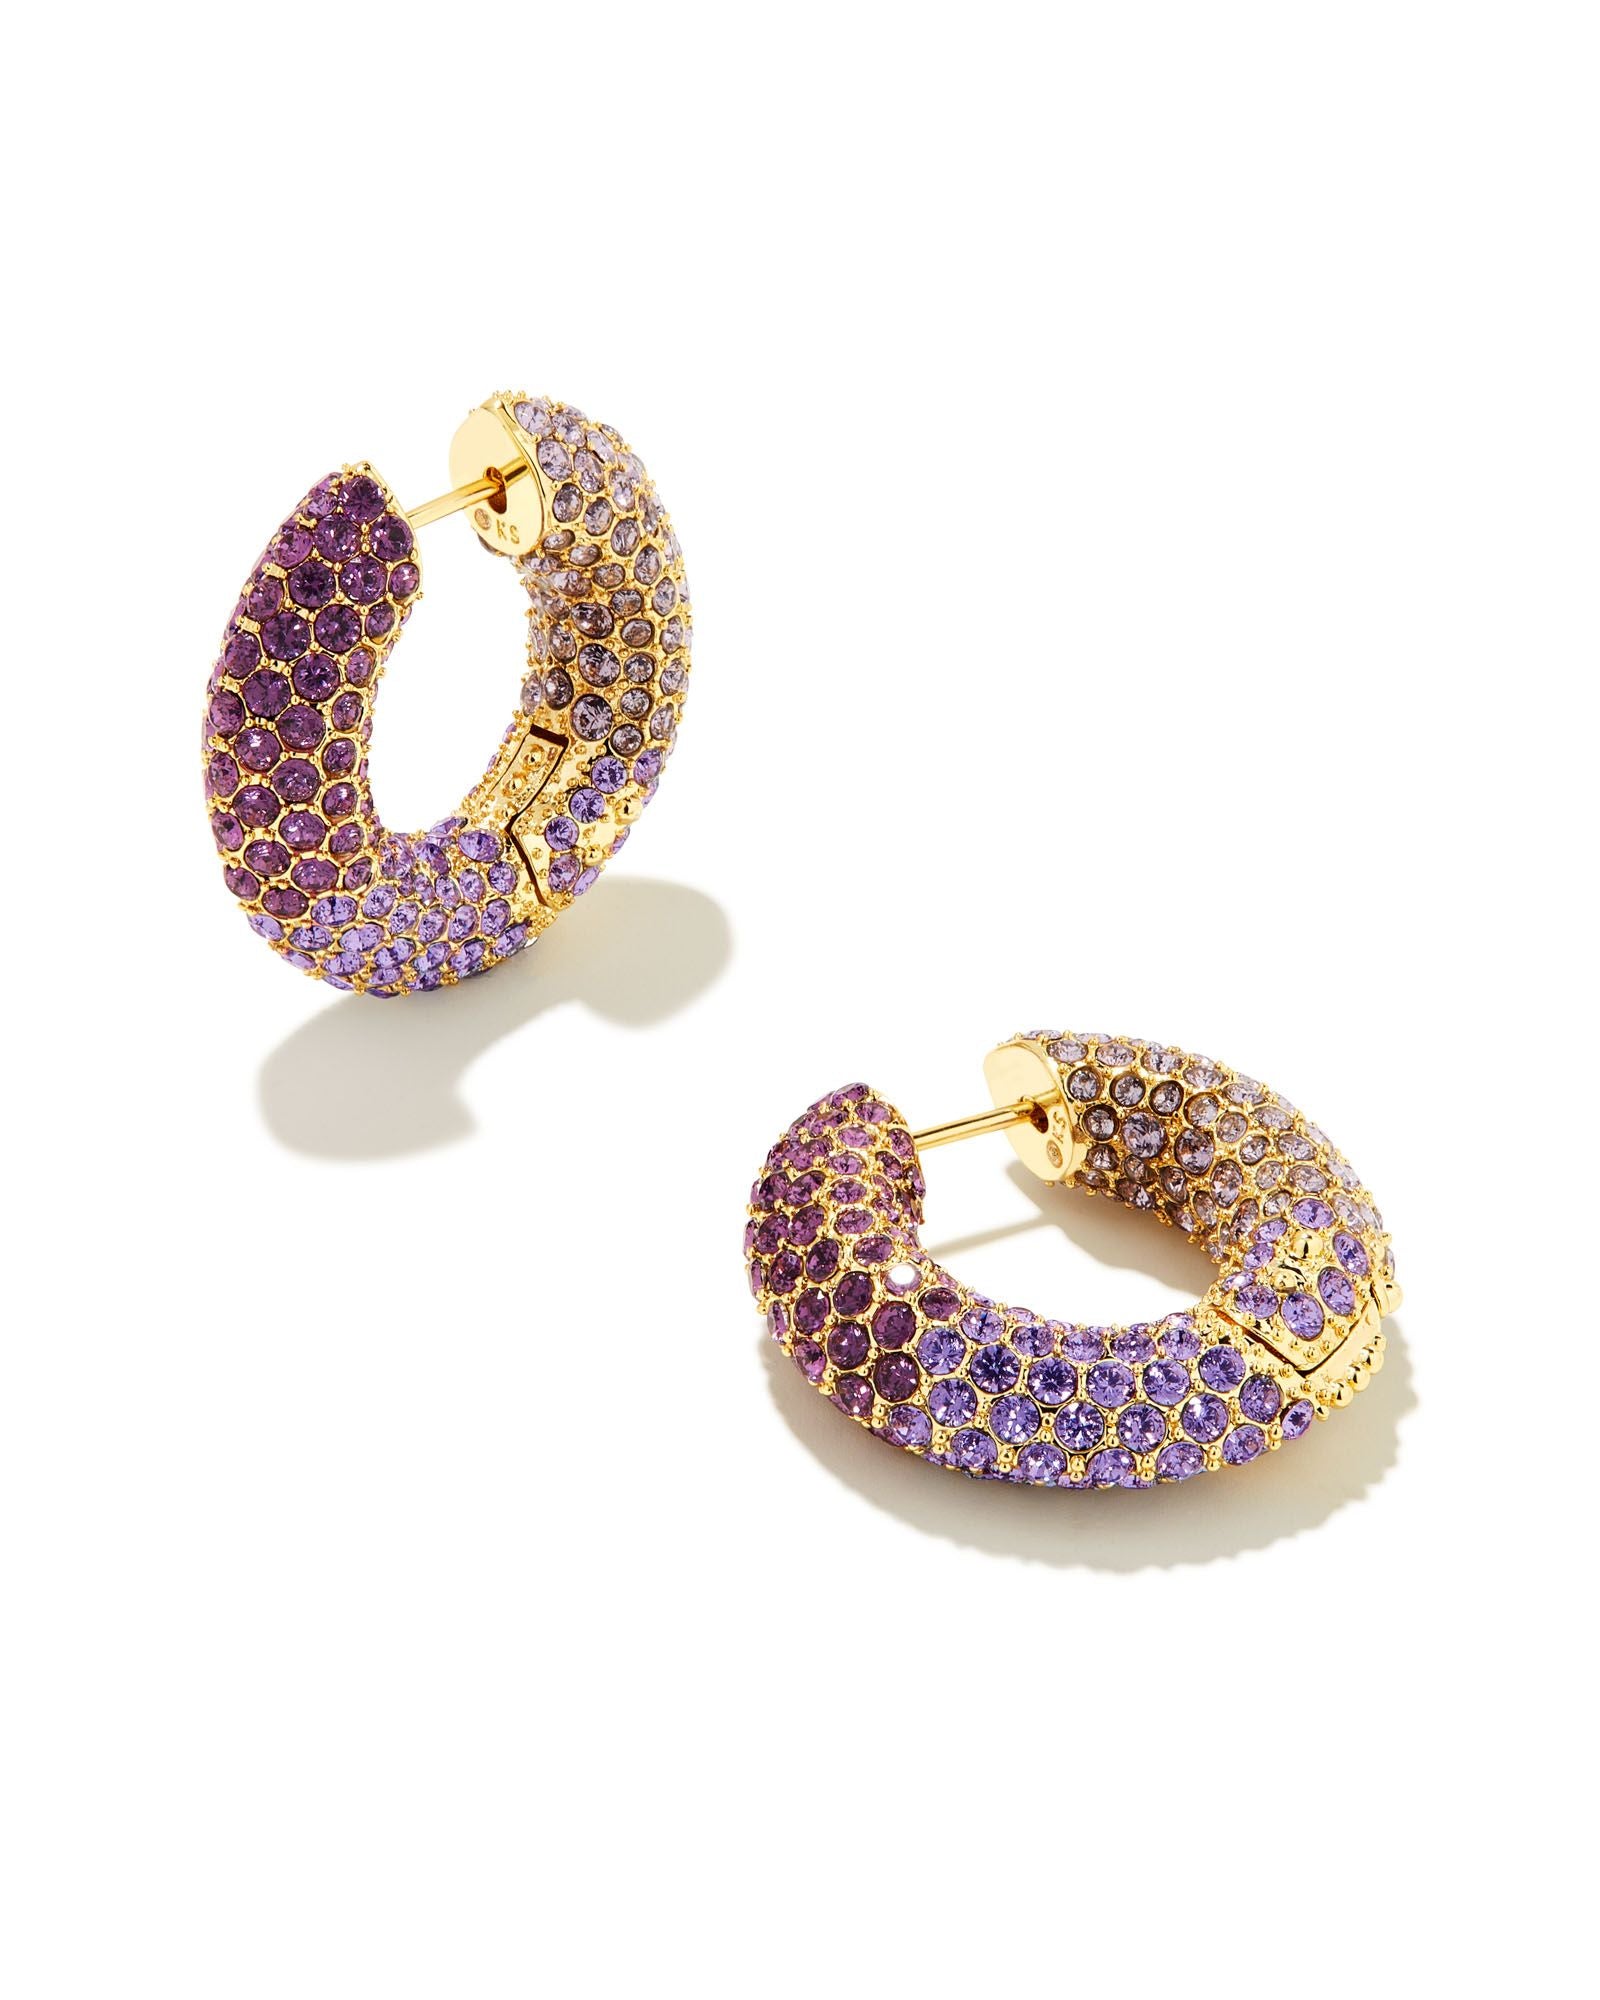 Kendra Scott Mikki Pave Hoop Earrings in Purple Mauve Ombre Mix and Gold